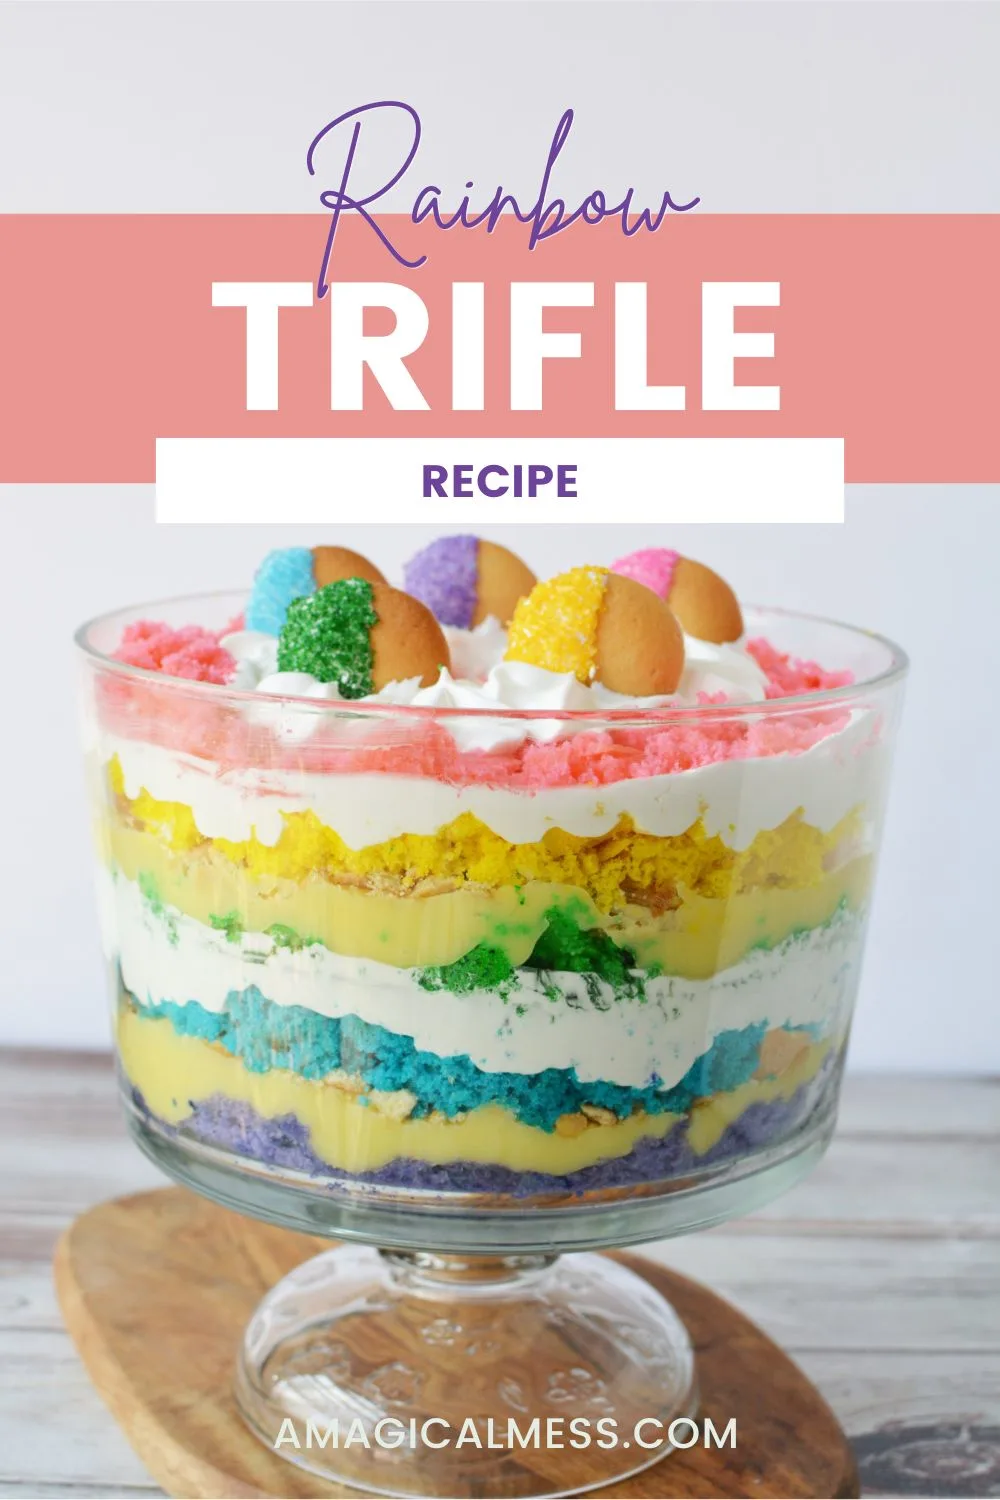 Layers of rainbow cake in a trifle.